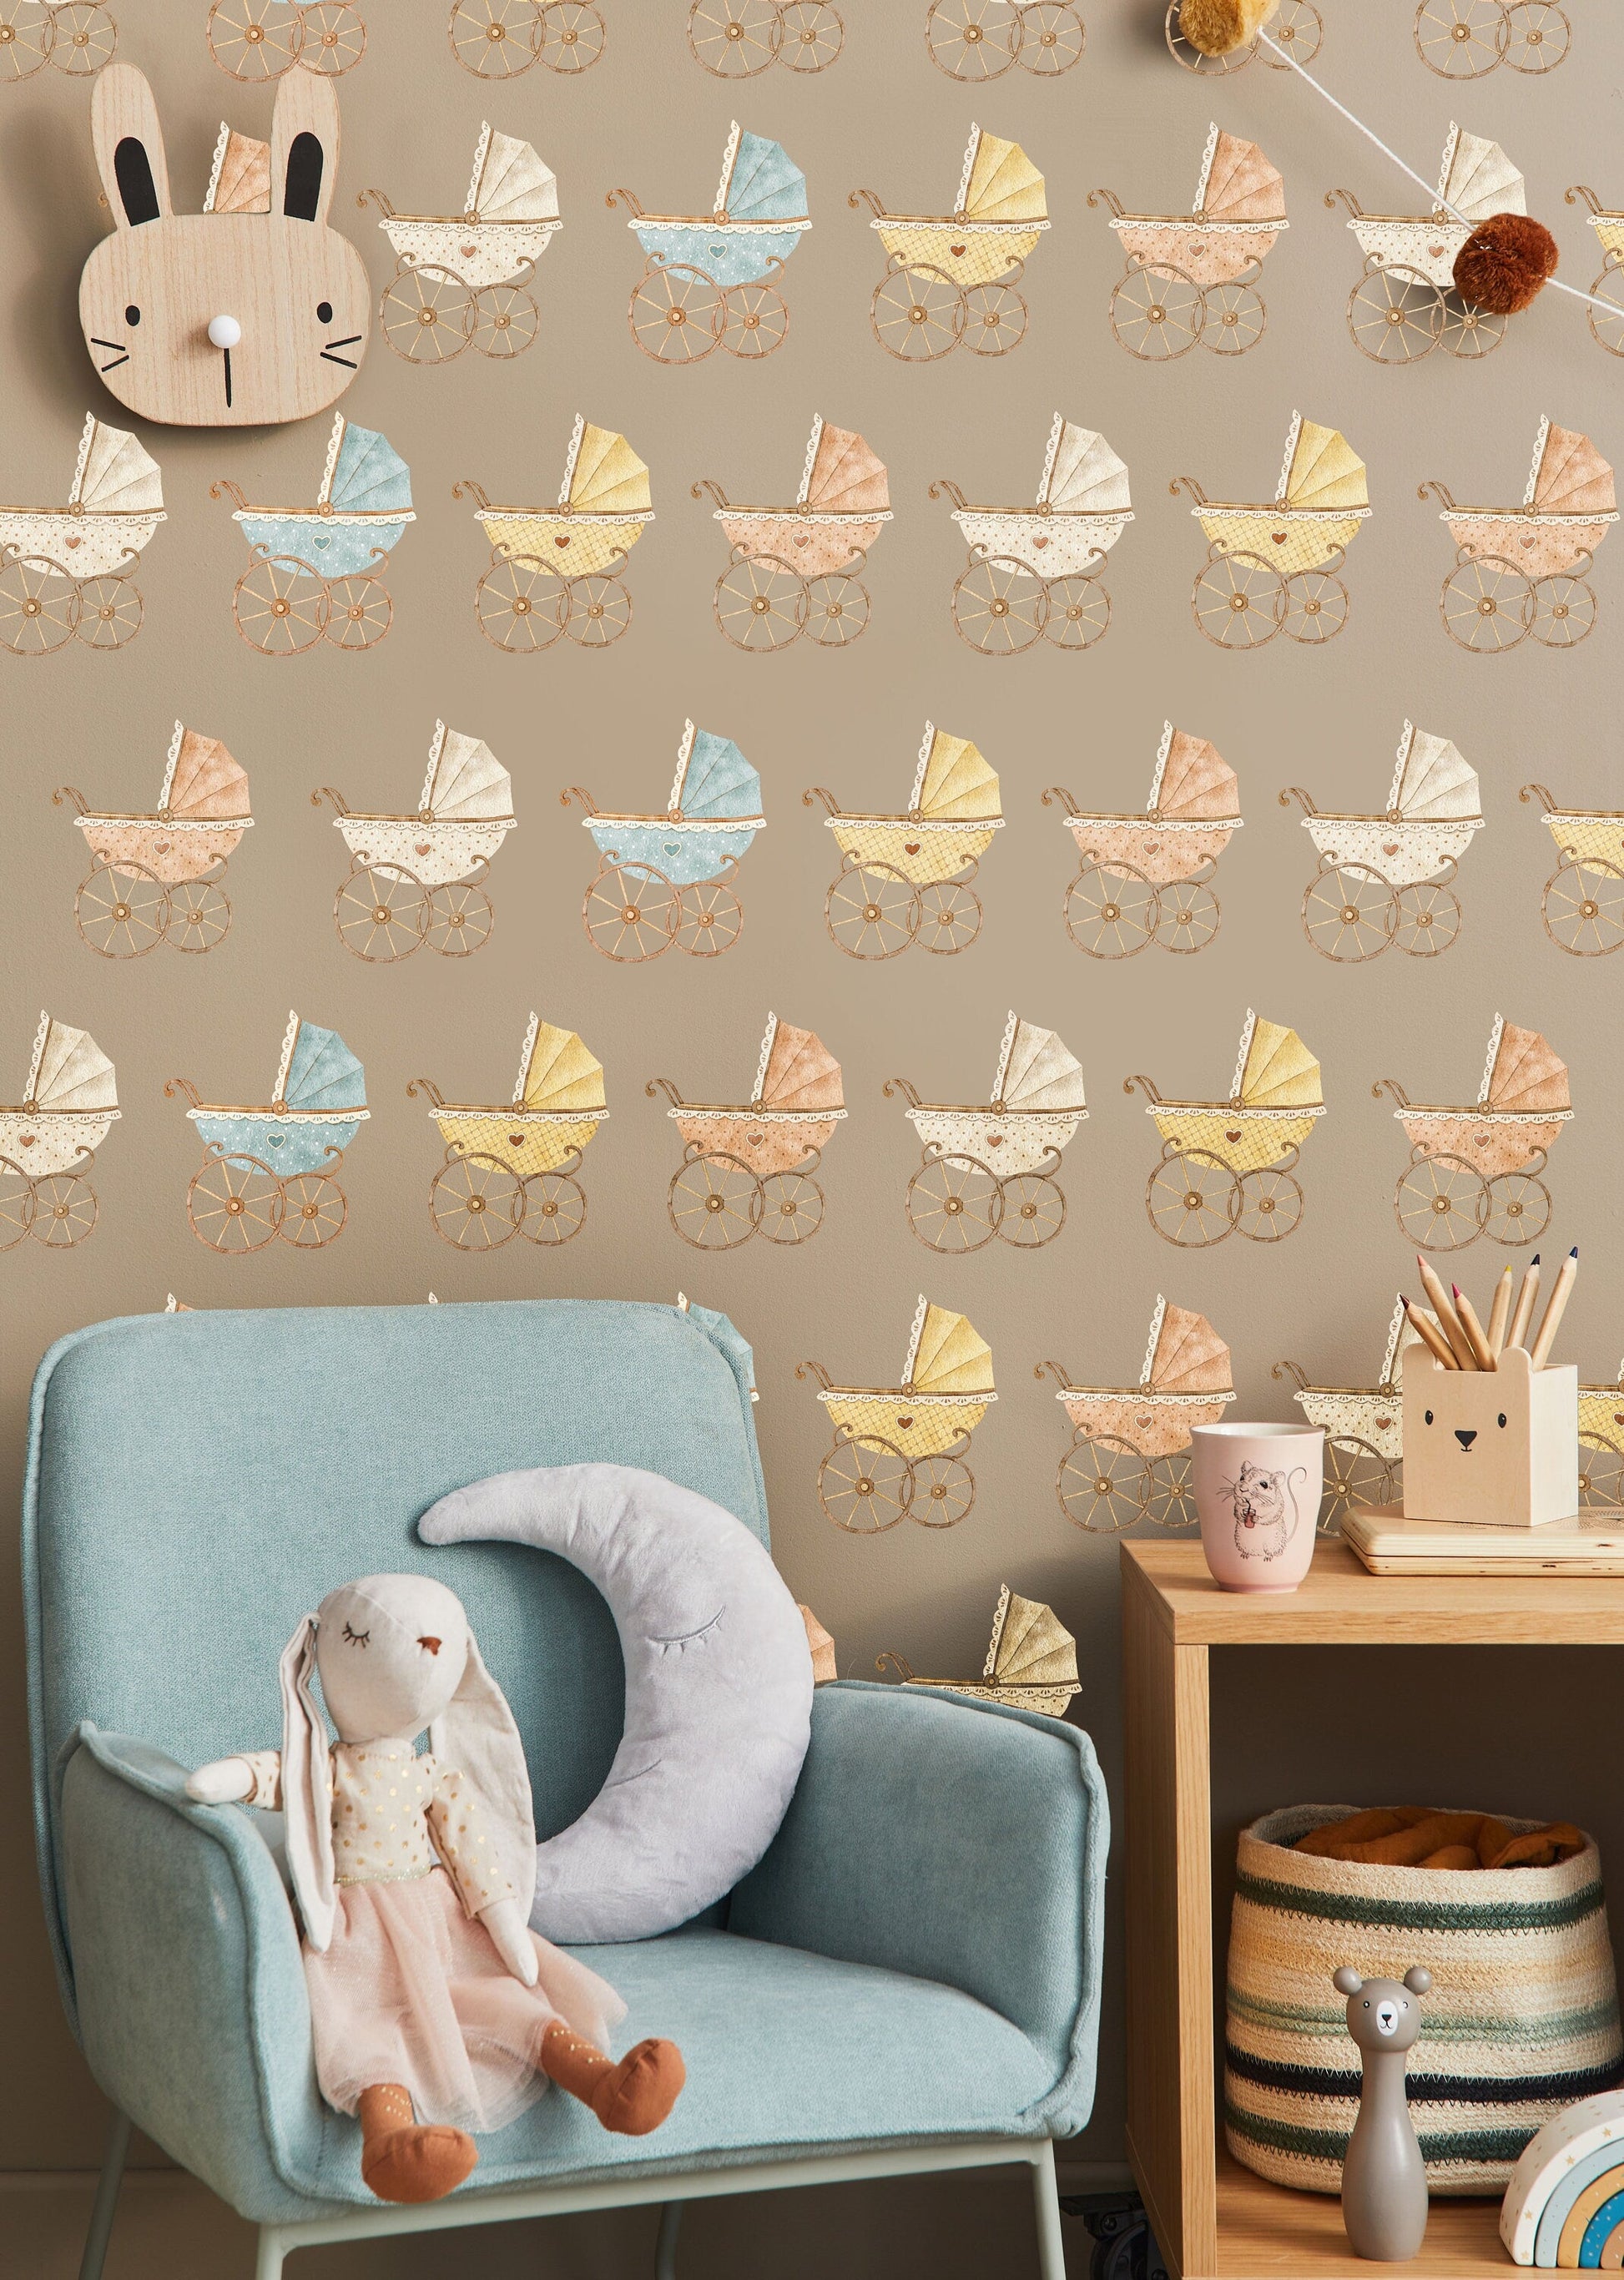 Baby Carriage Wall Decals Nursery Stickers, LF340